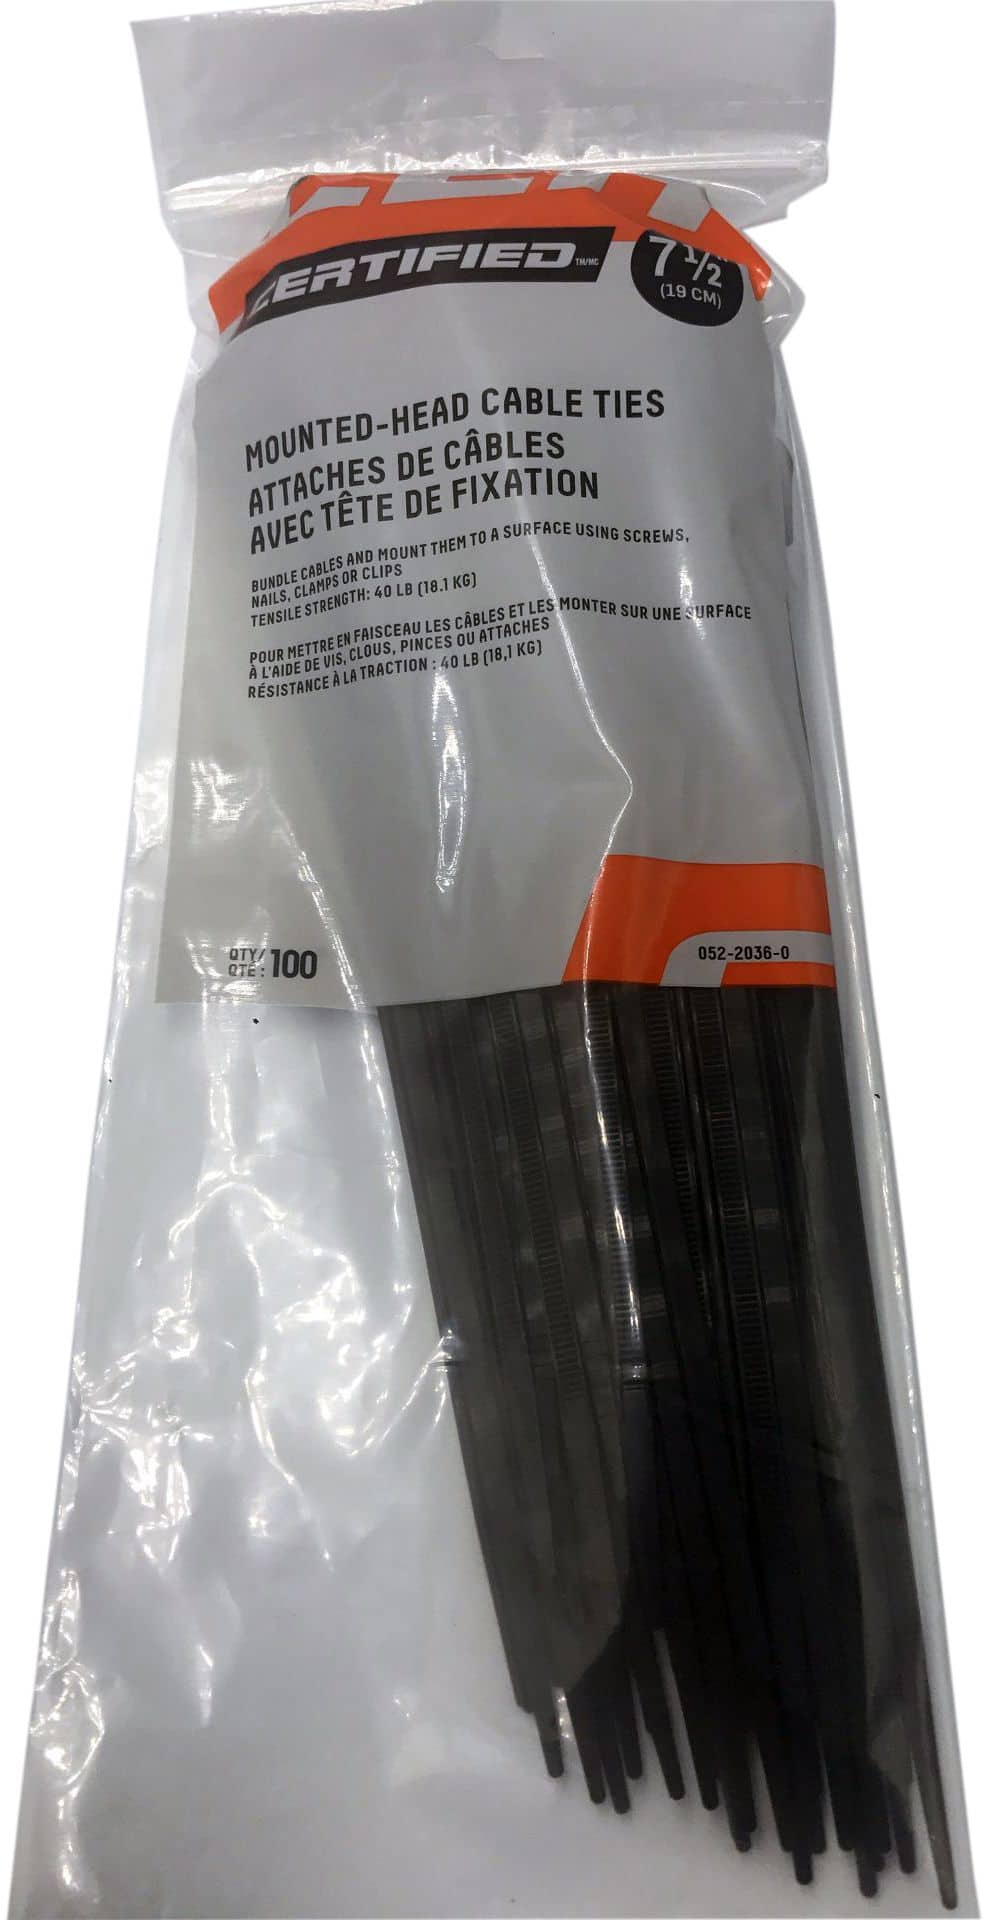 Certified Medium Duty Releasable Cable Ties with 50-lbs Tensile